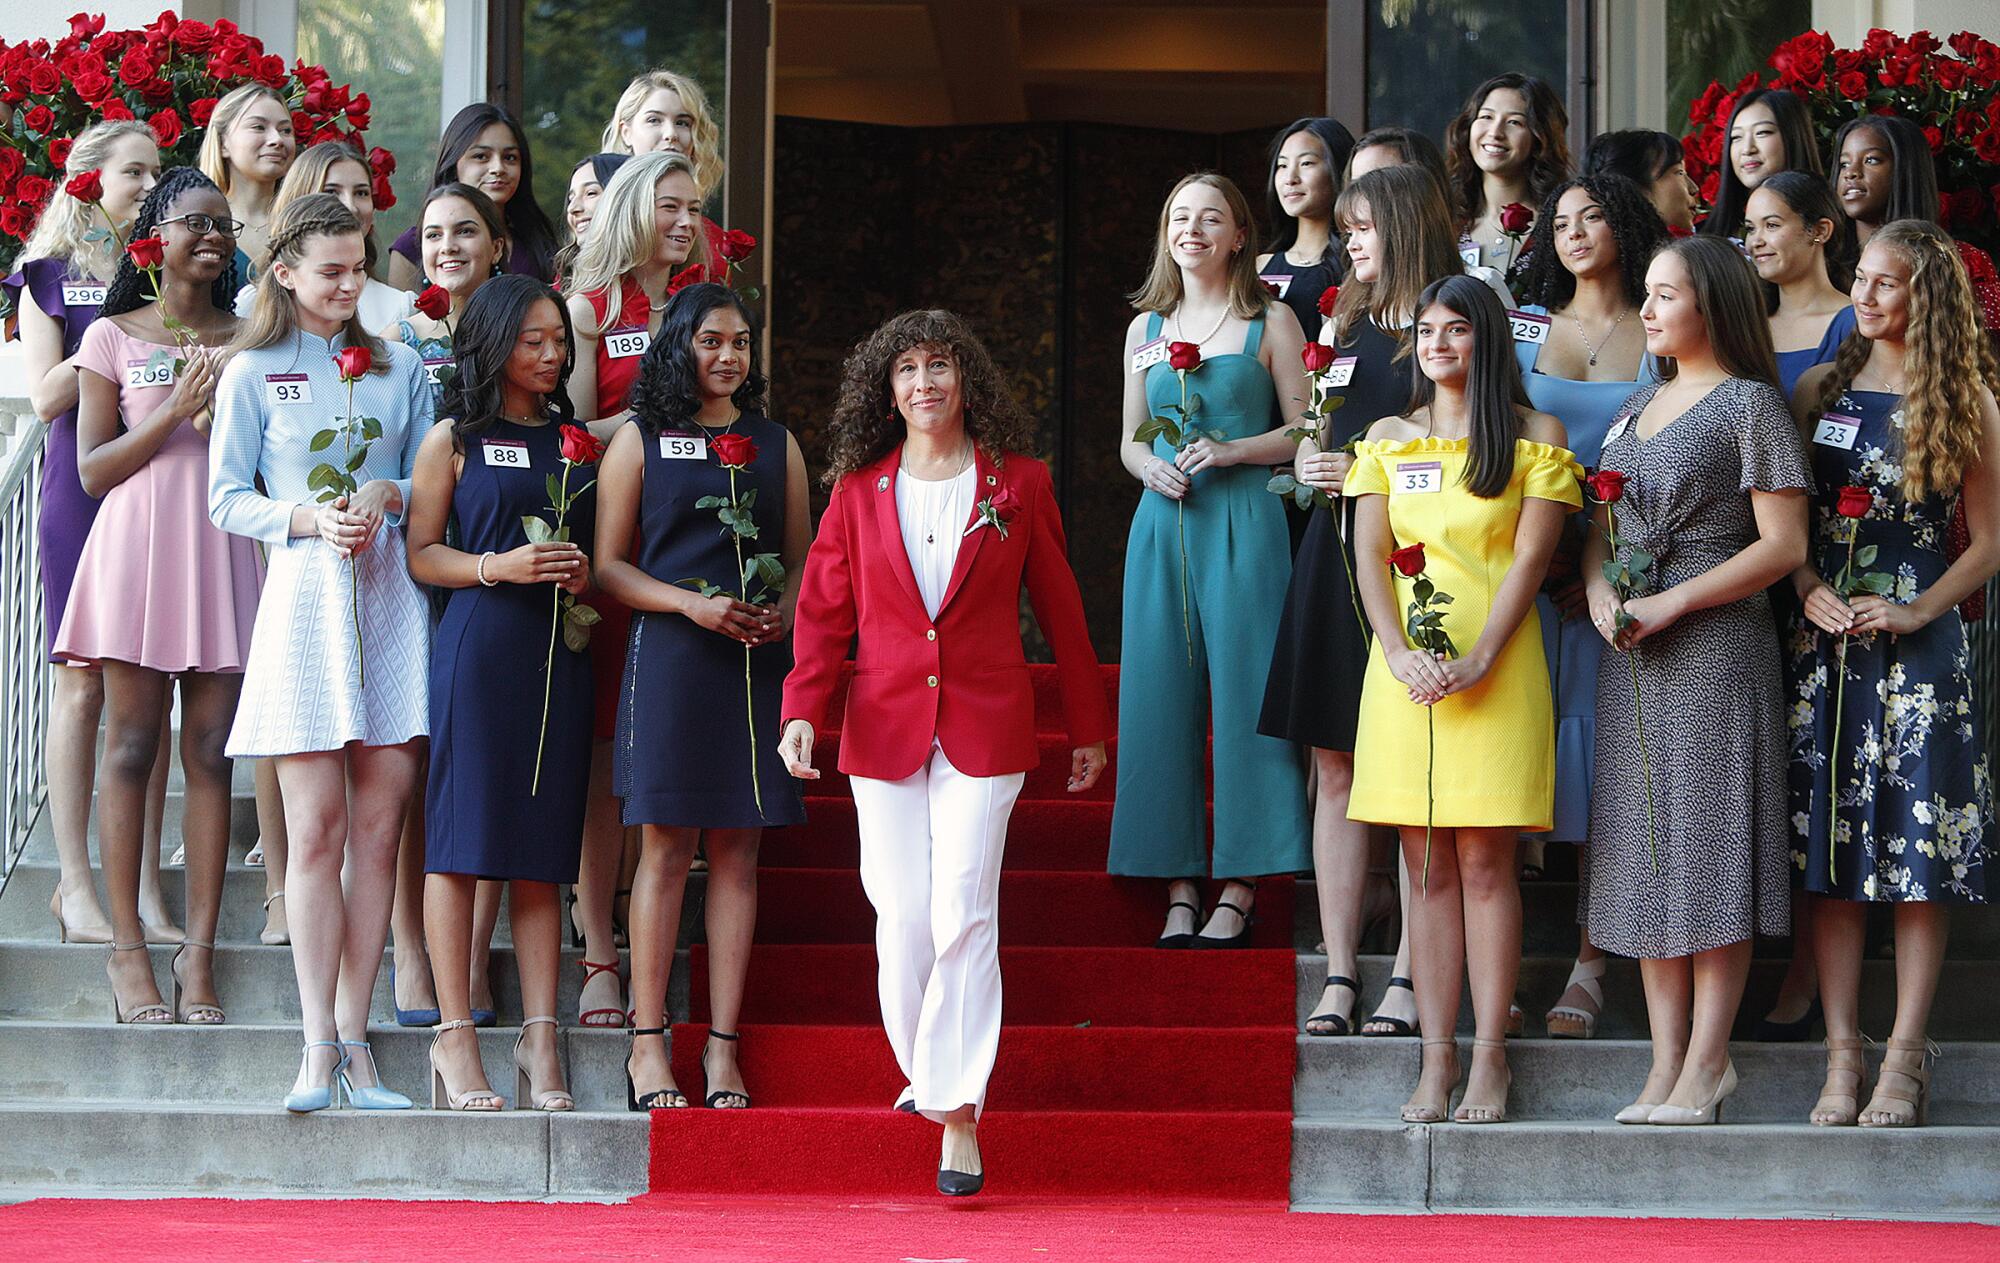 Laura Farber, president of the 2020 Tournament of Roses, steps to the stage to announce the 2020 Royal Court. 